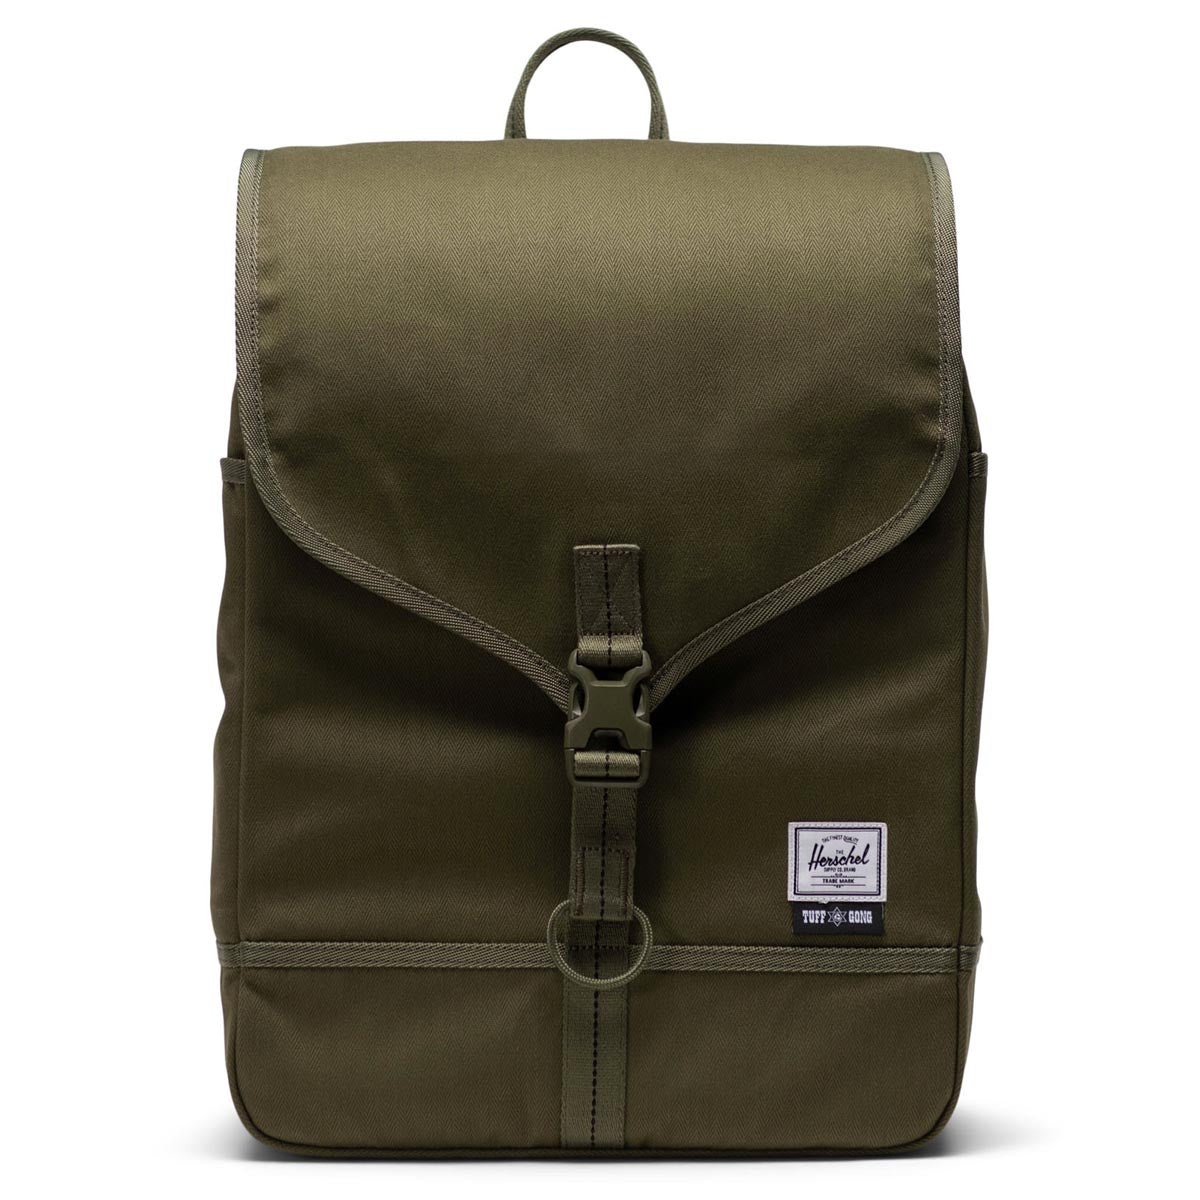 Herschel Supply Purcell Backpack - Ivy Green image 1